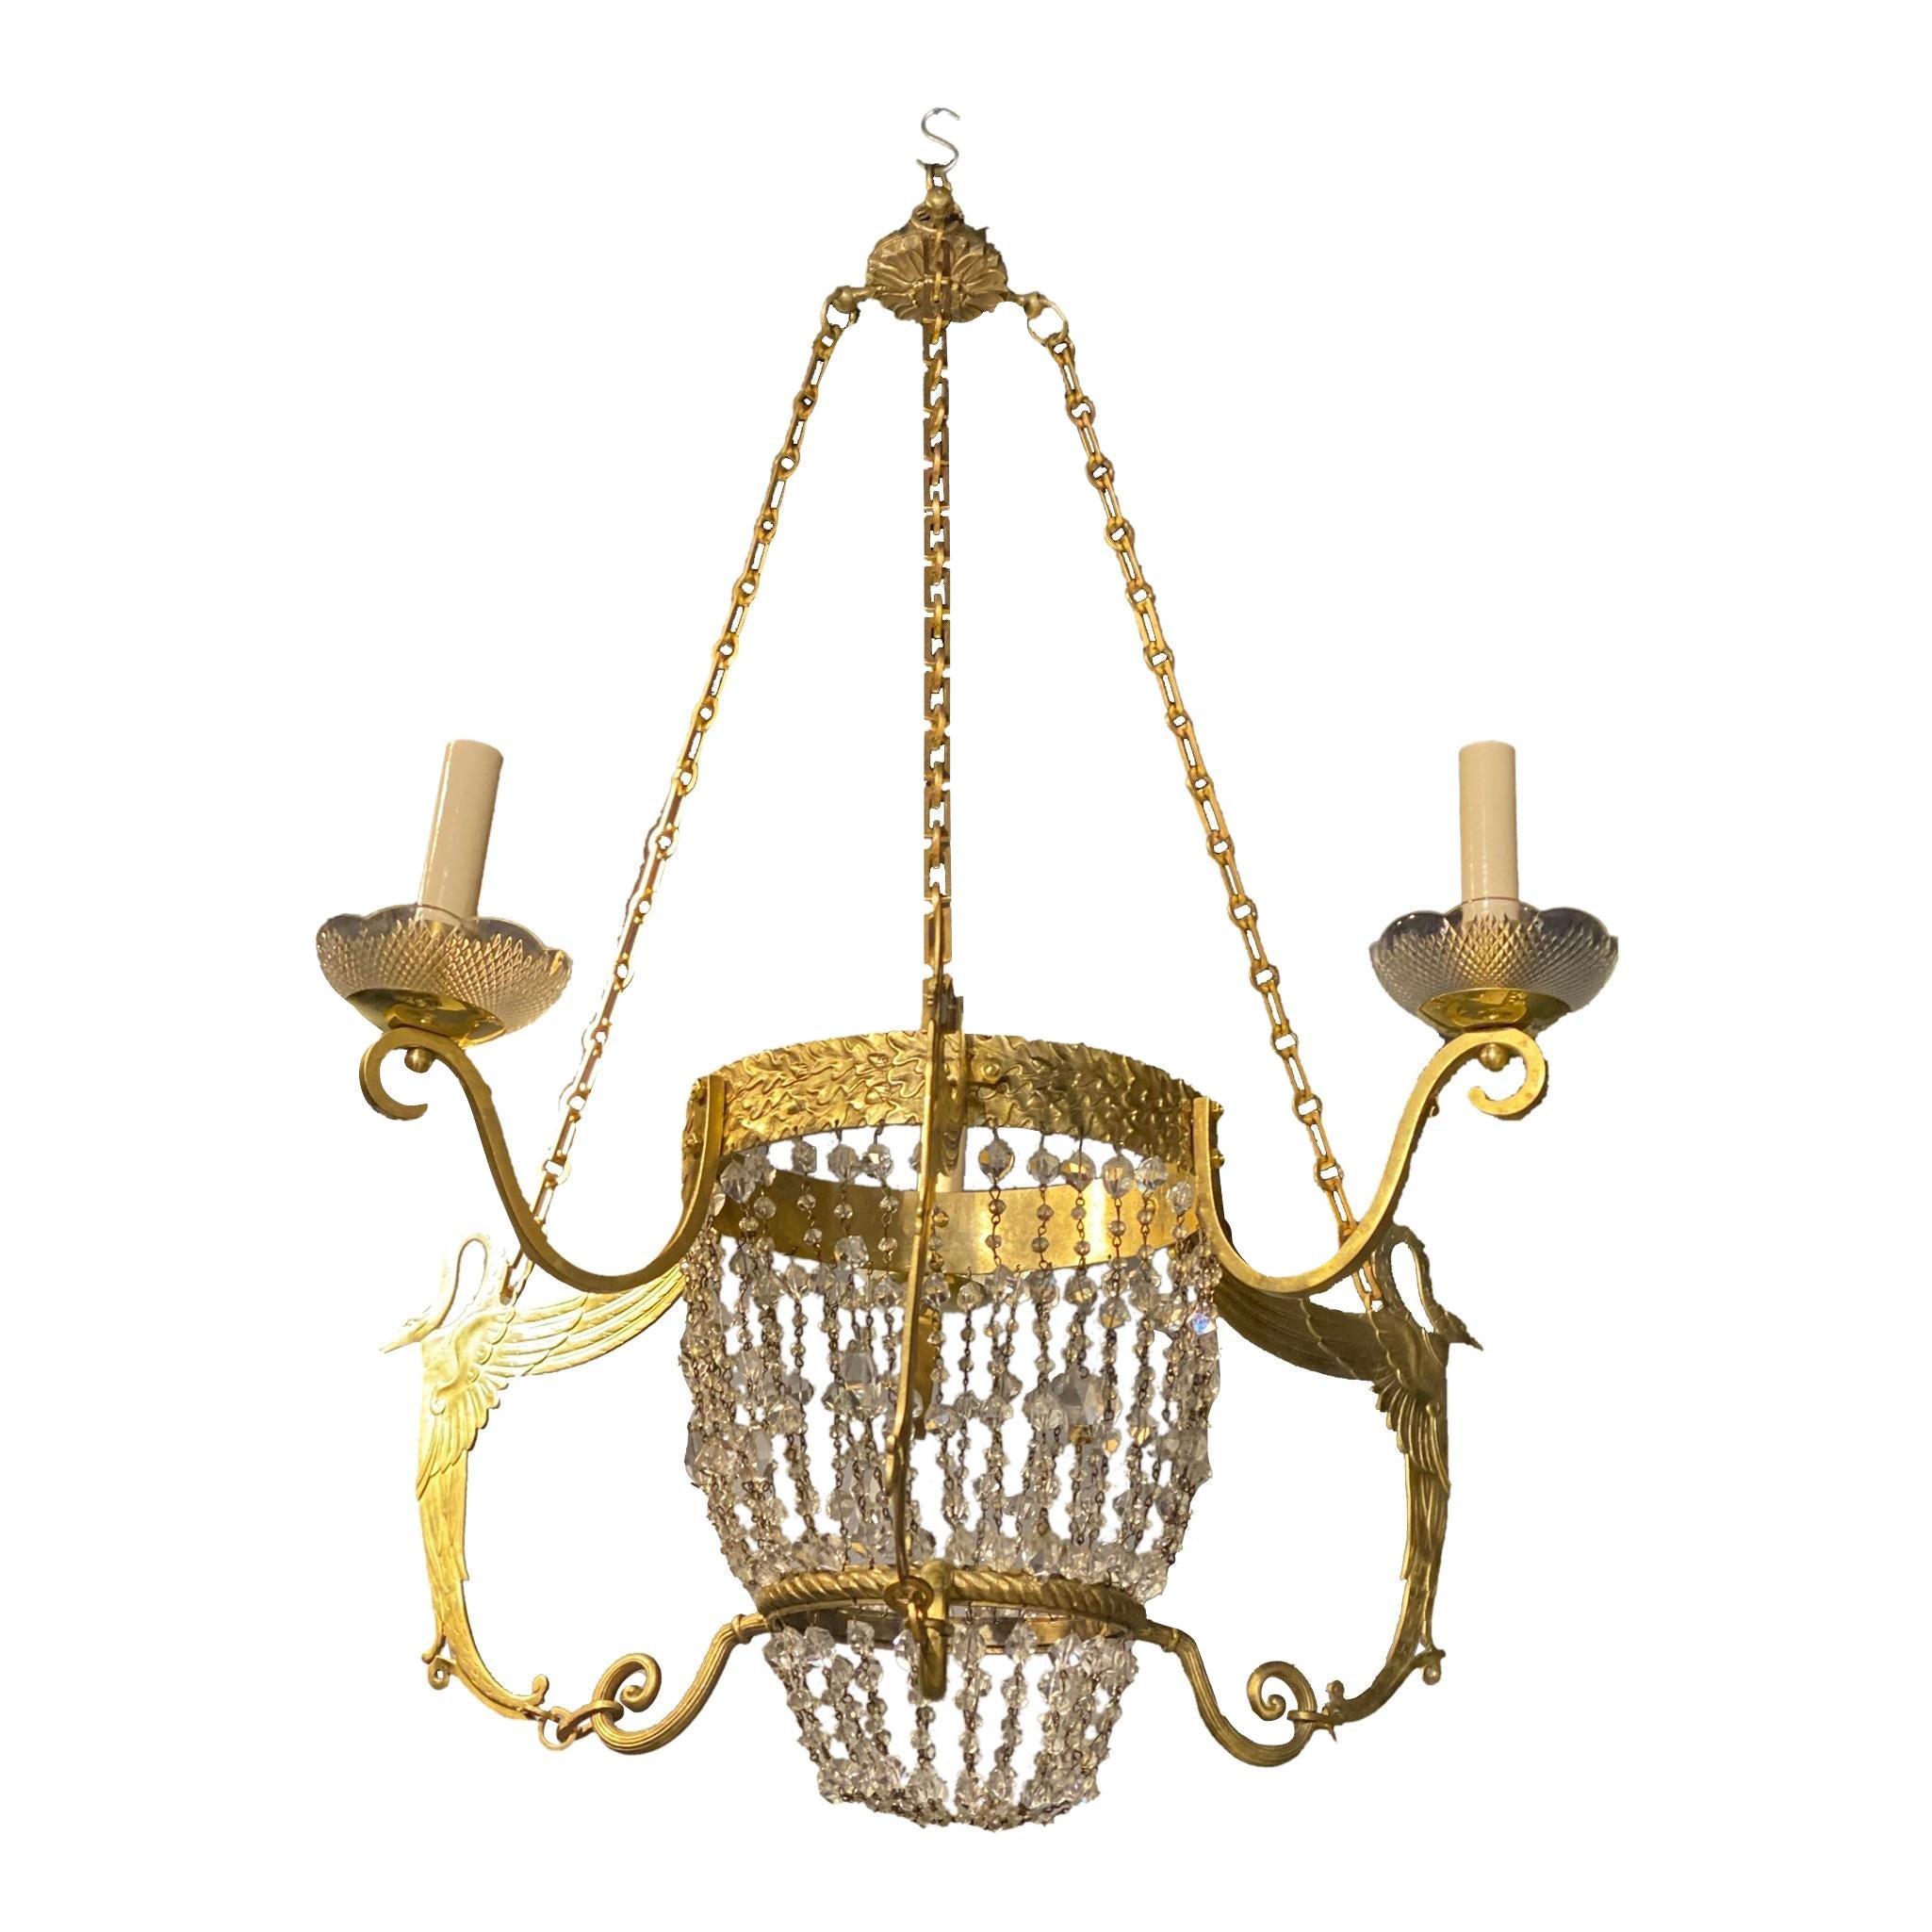 1920’s French Empire Chandelier with 3 lights For Sale